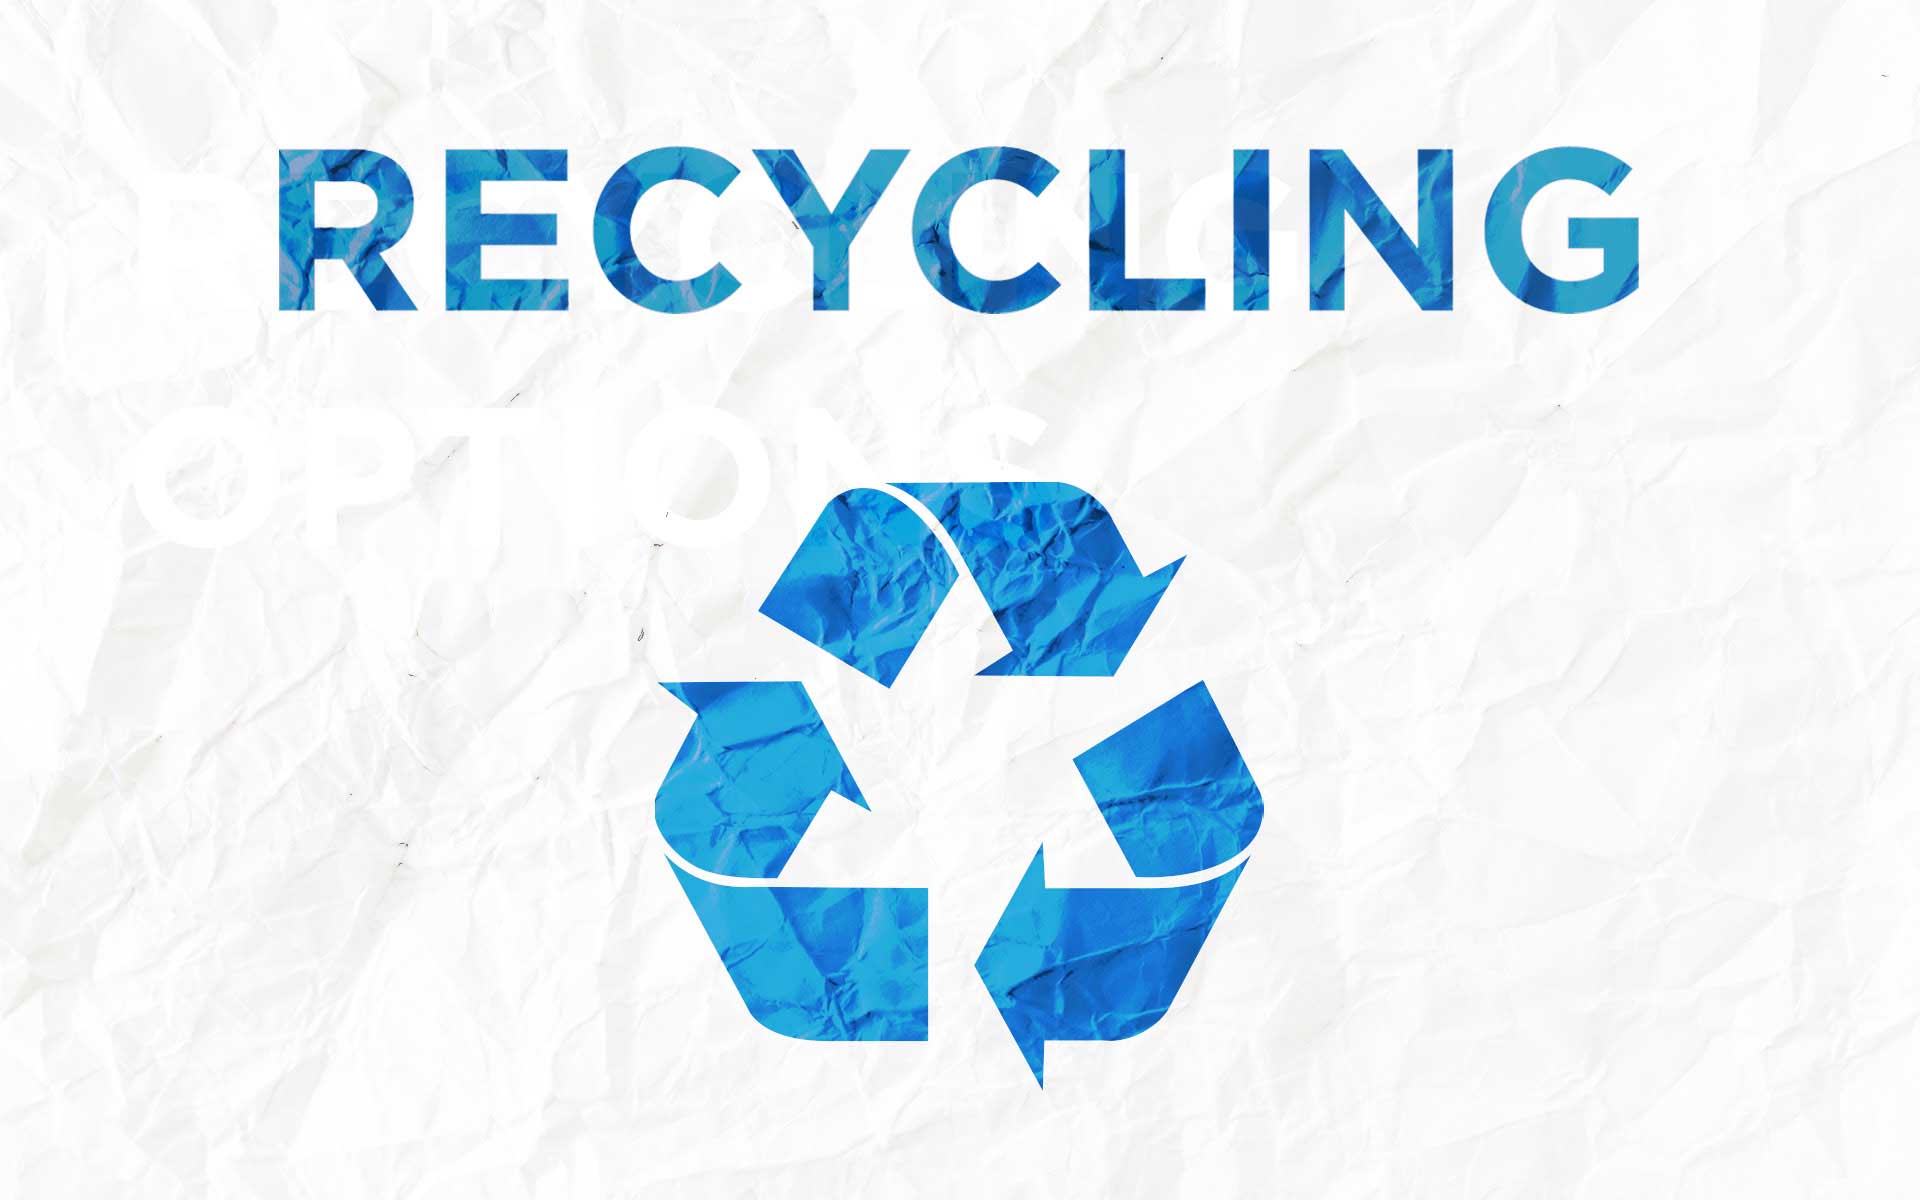 A picture about recycling.